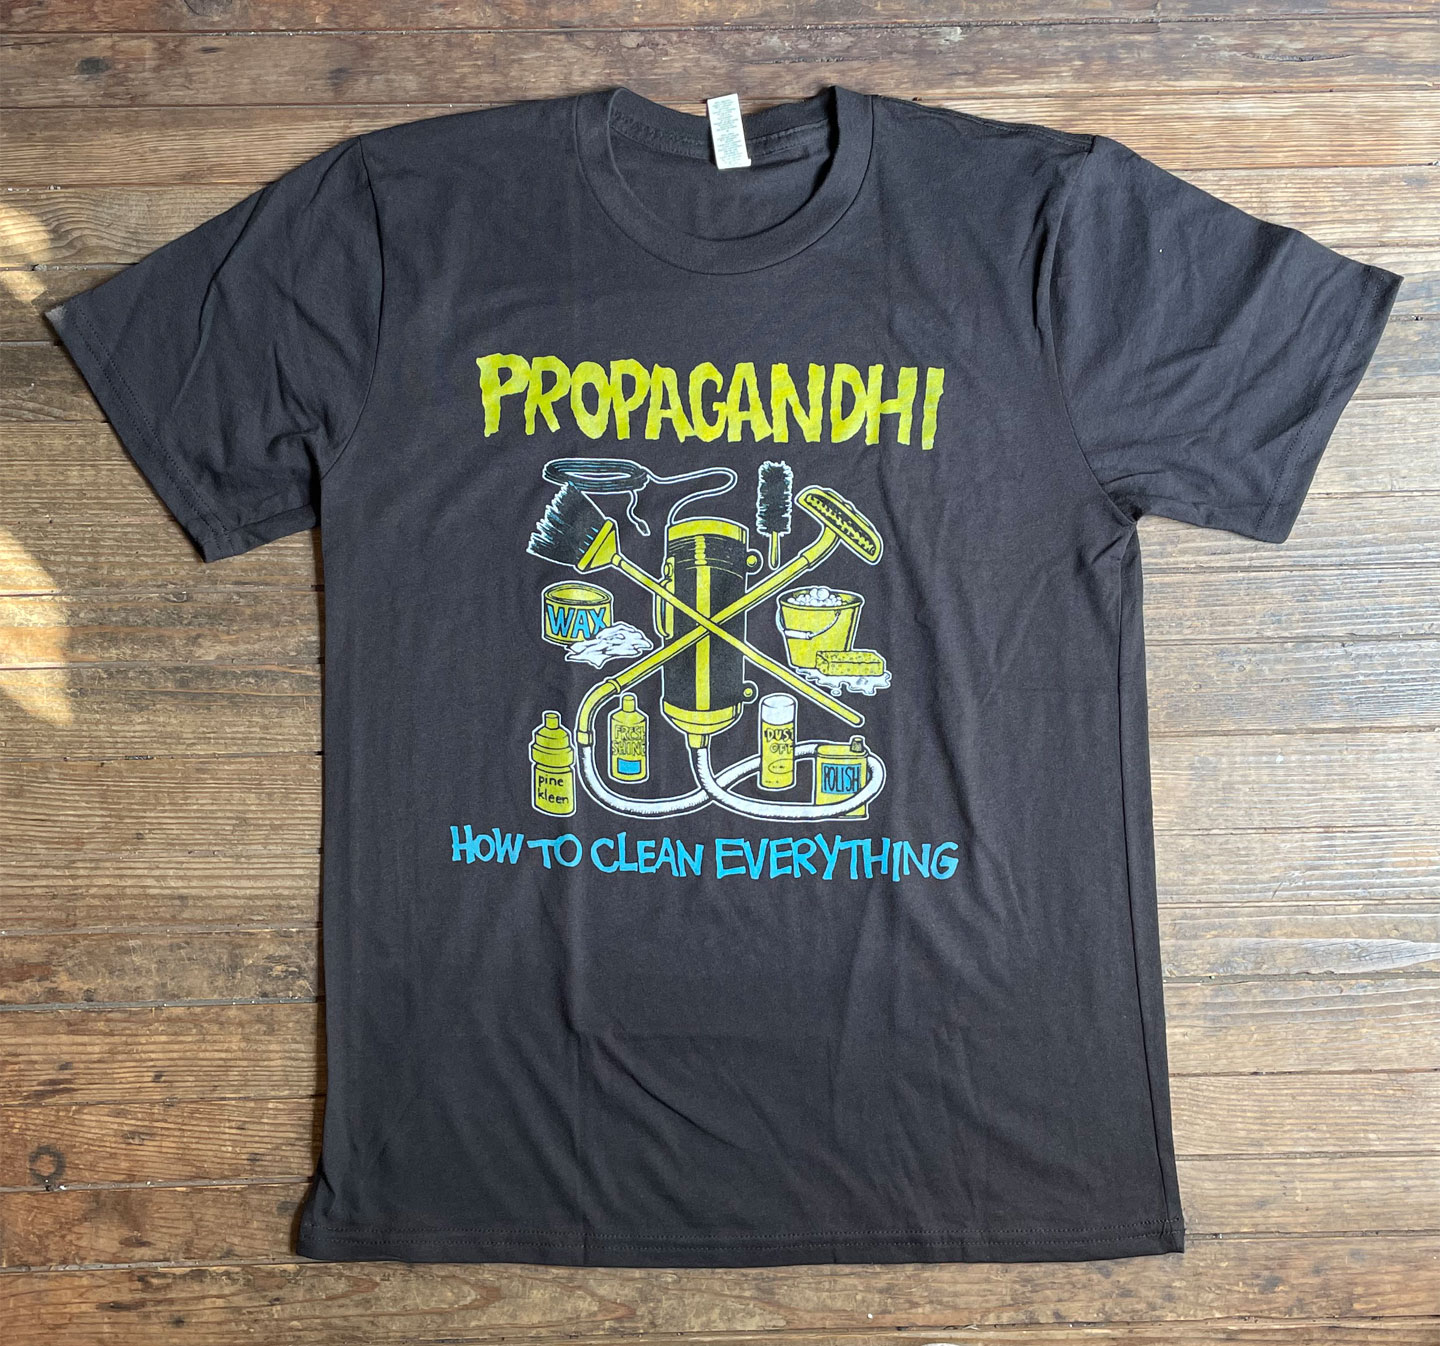 PROPAGANDHI Tシャツ How To Clean Everything オフィシャル!